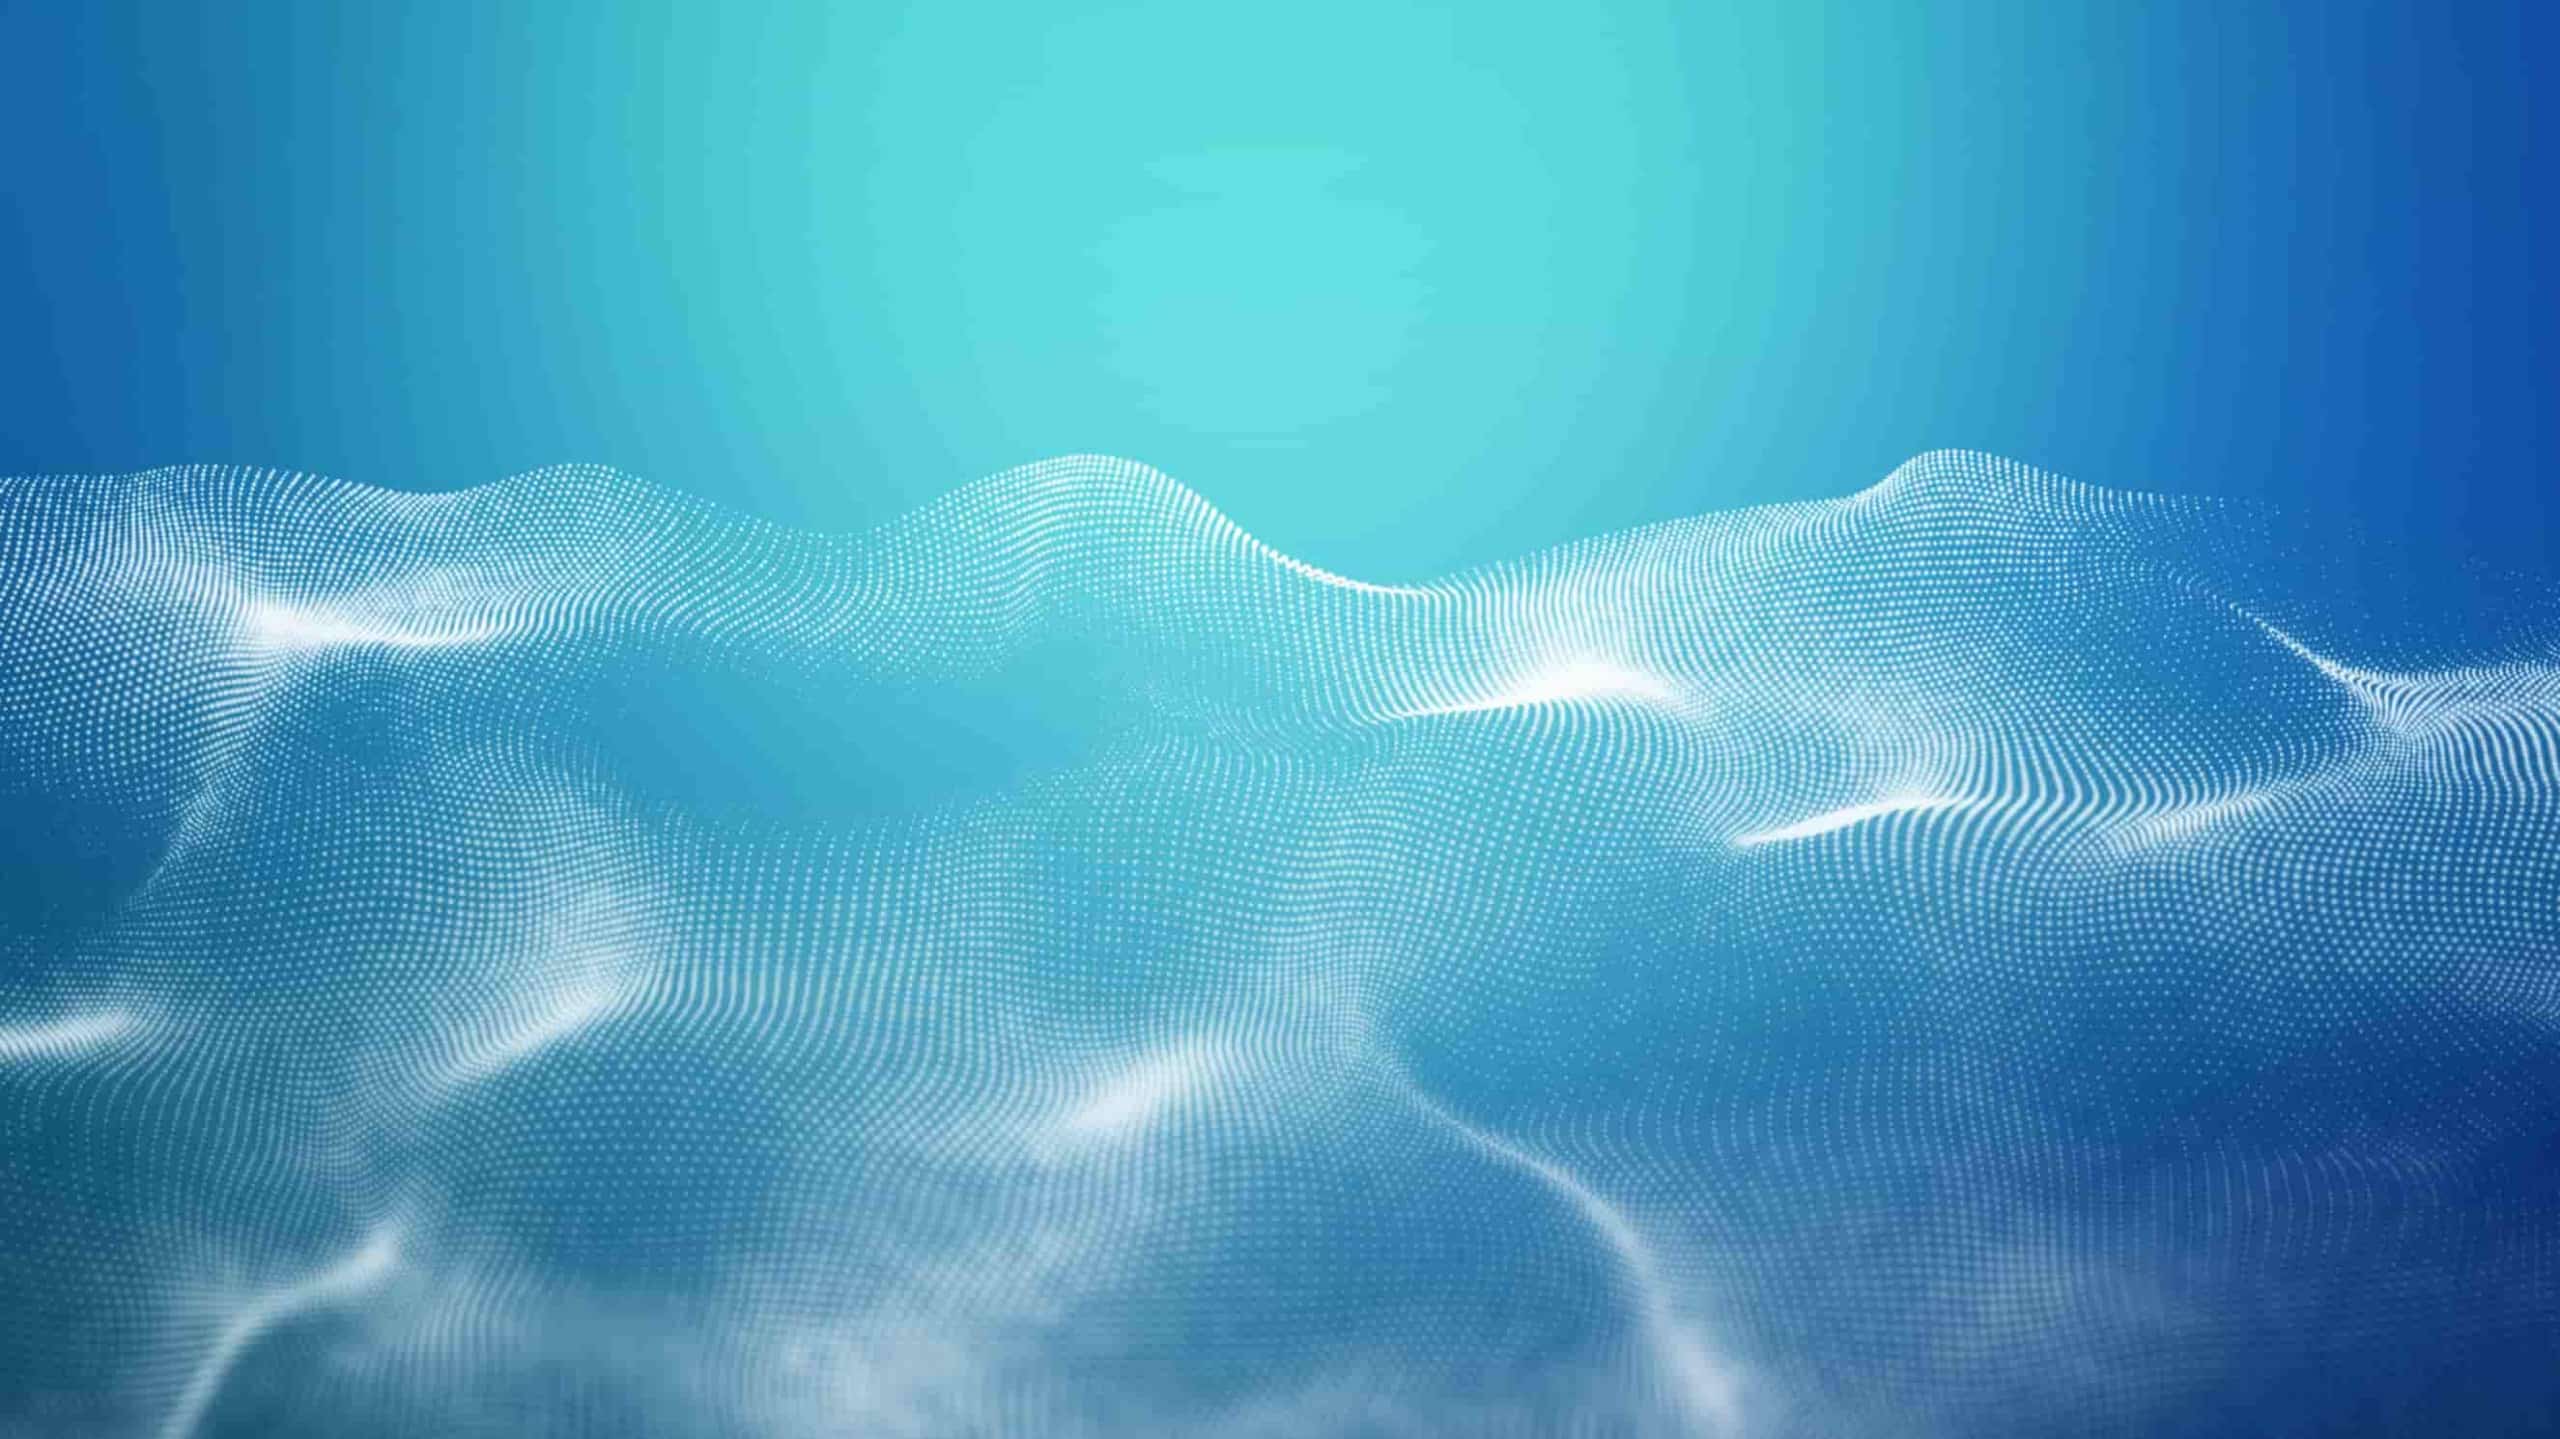 Abstract digital landscape with flowing blue grid pattern simulating ocean waves under a glowing sun. the image portrays a digital or virtual reality seascape with a tranquil and futuristic feel.